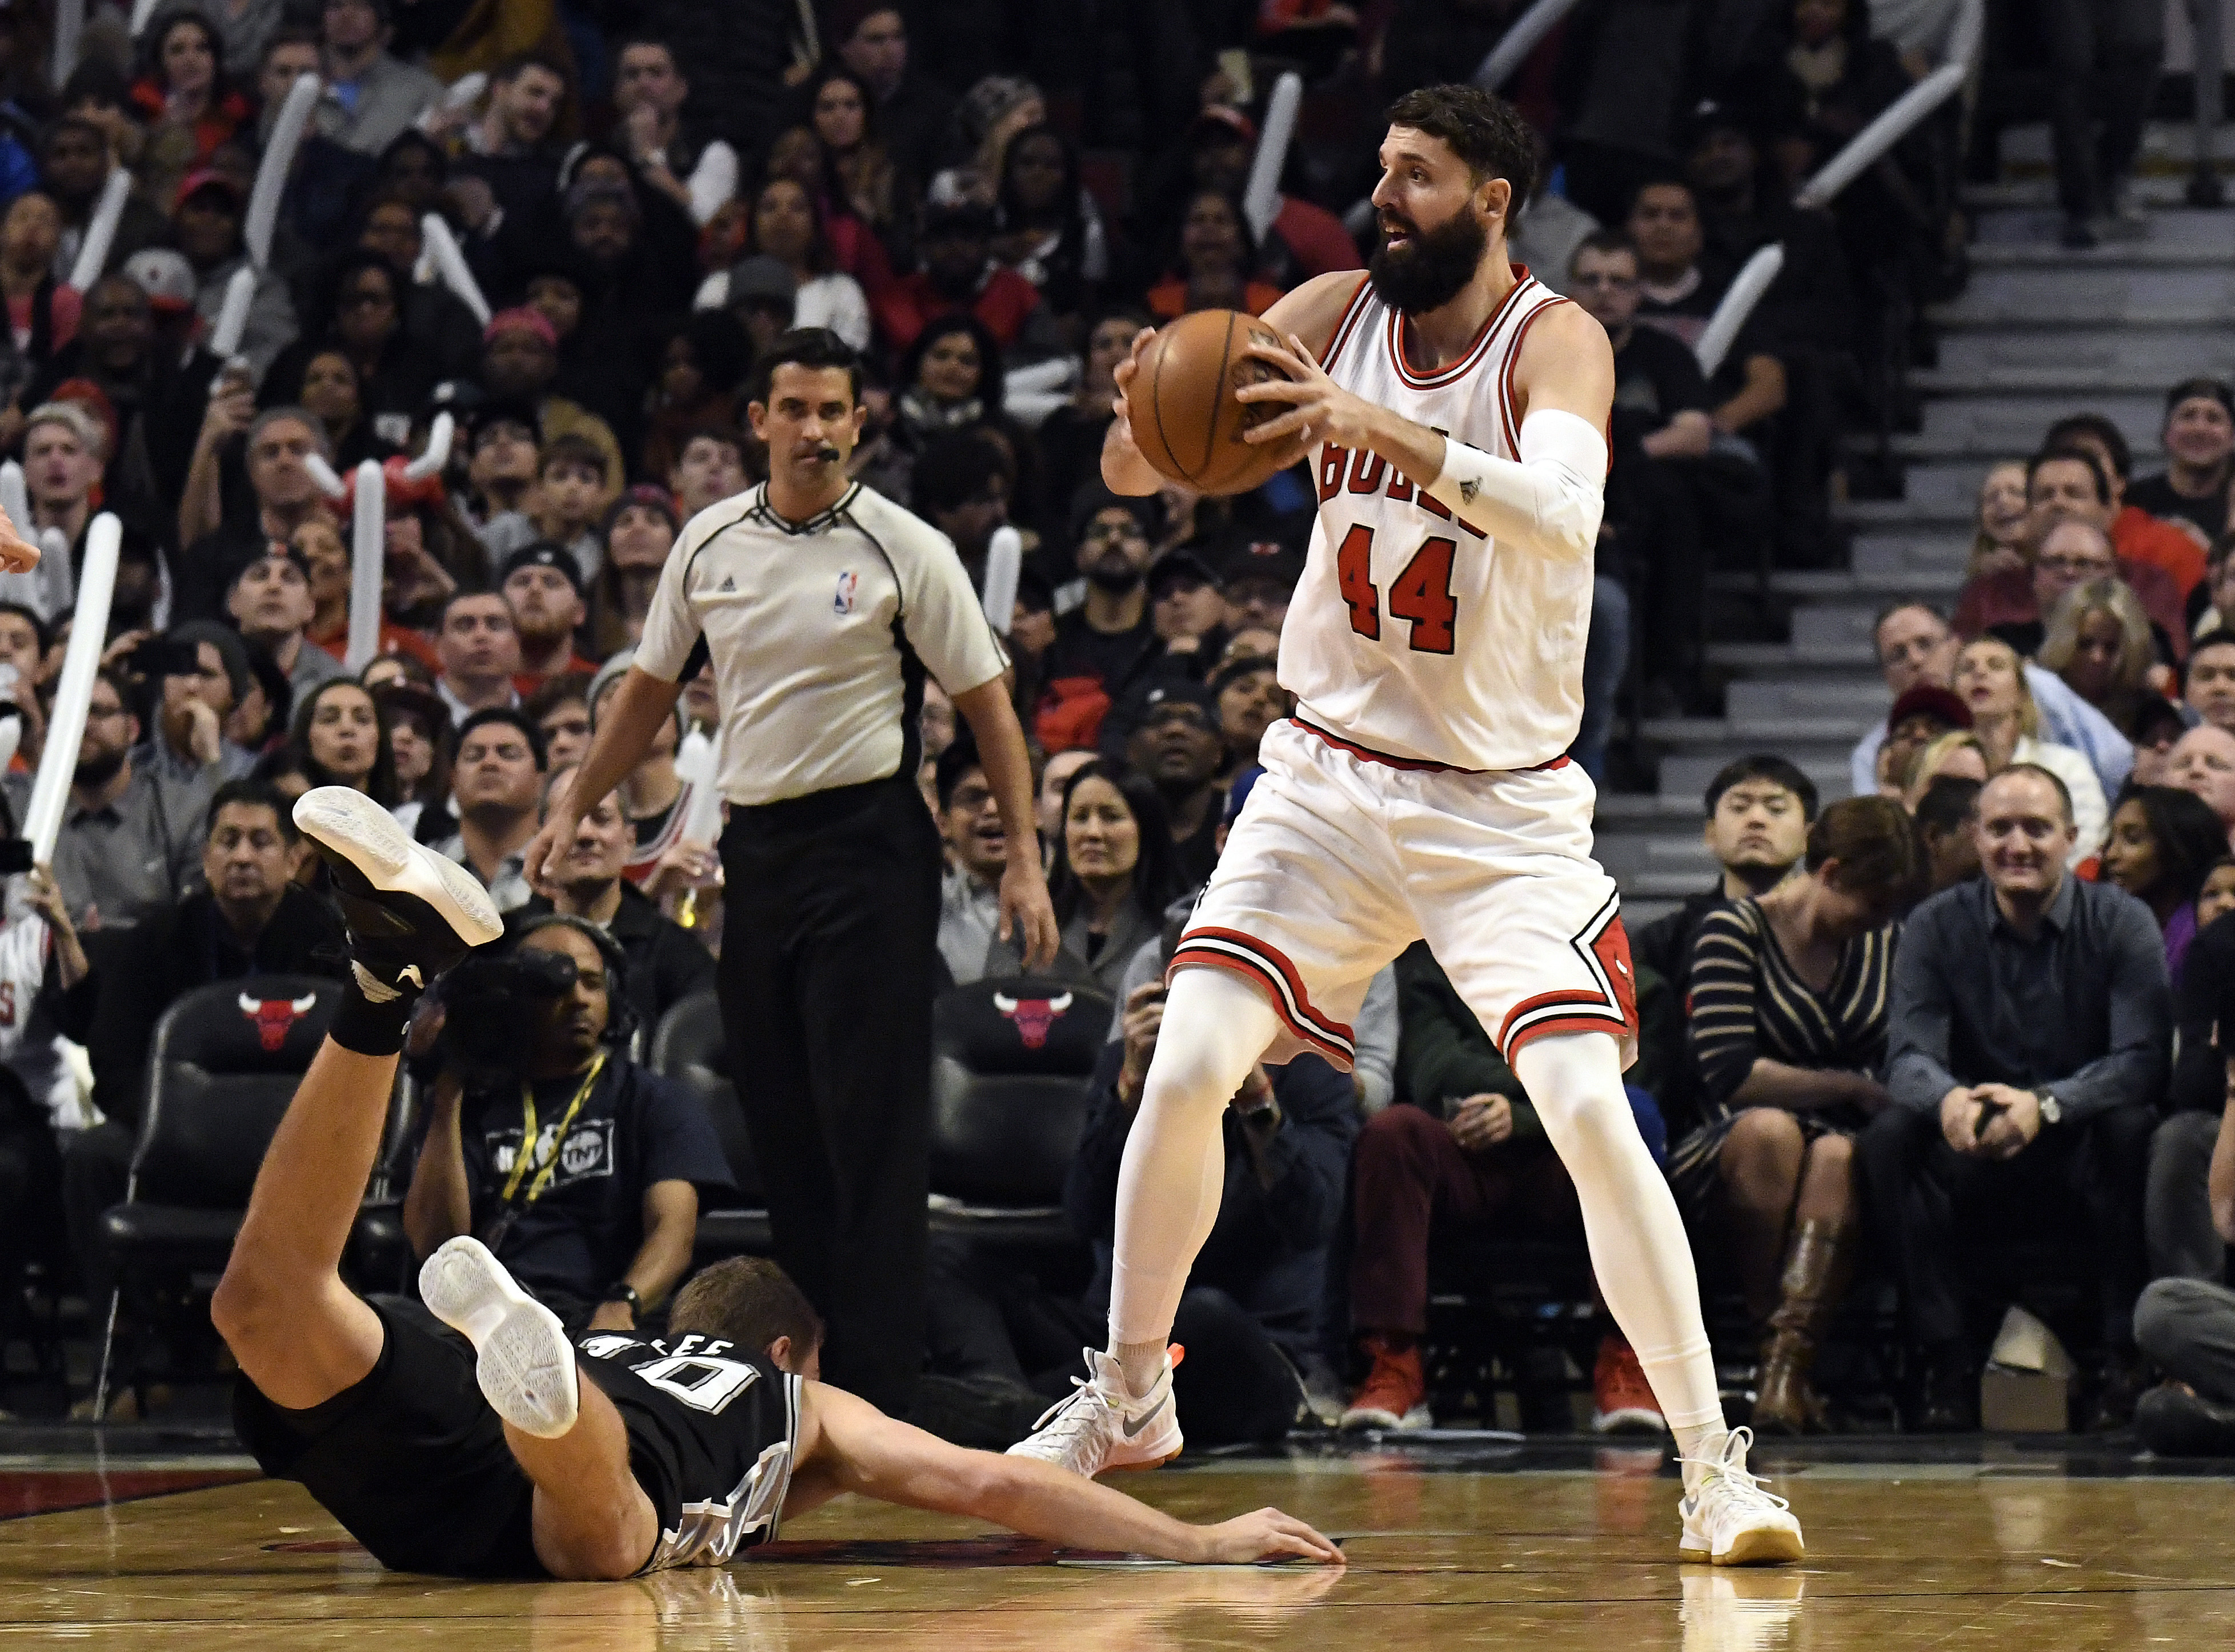 Chicago Bulls forward Nikola Mirotic (44) grabs a loose ball in front of San Antonio Spurs forward David Lee (10) during the first quarter of an NBA basketball game in Chicago, Thursday, Dec. 8, 2016. AP